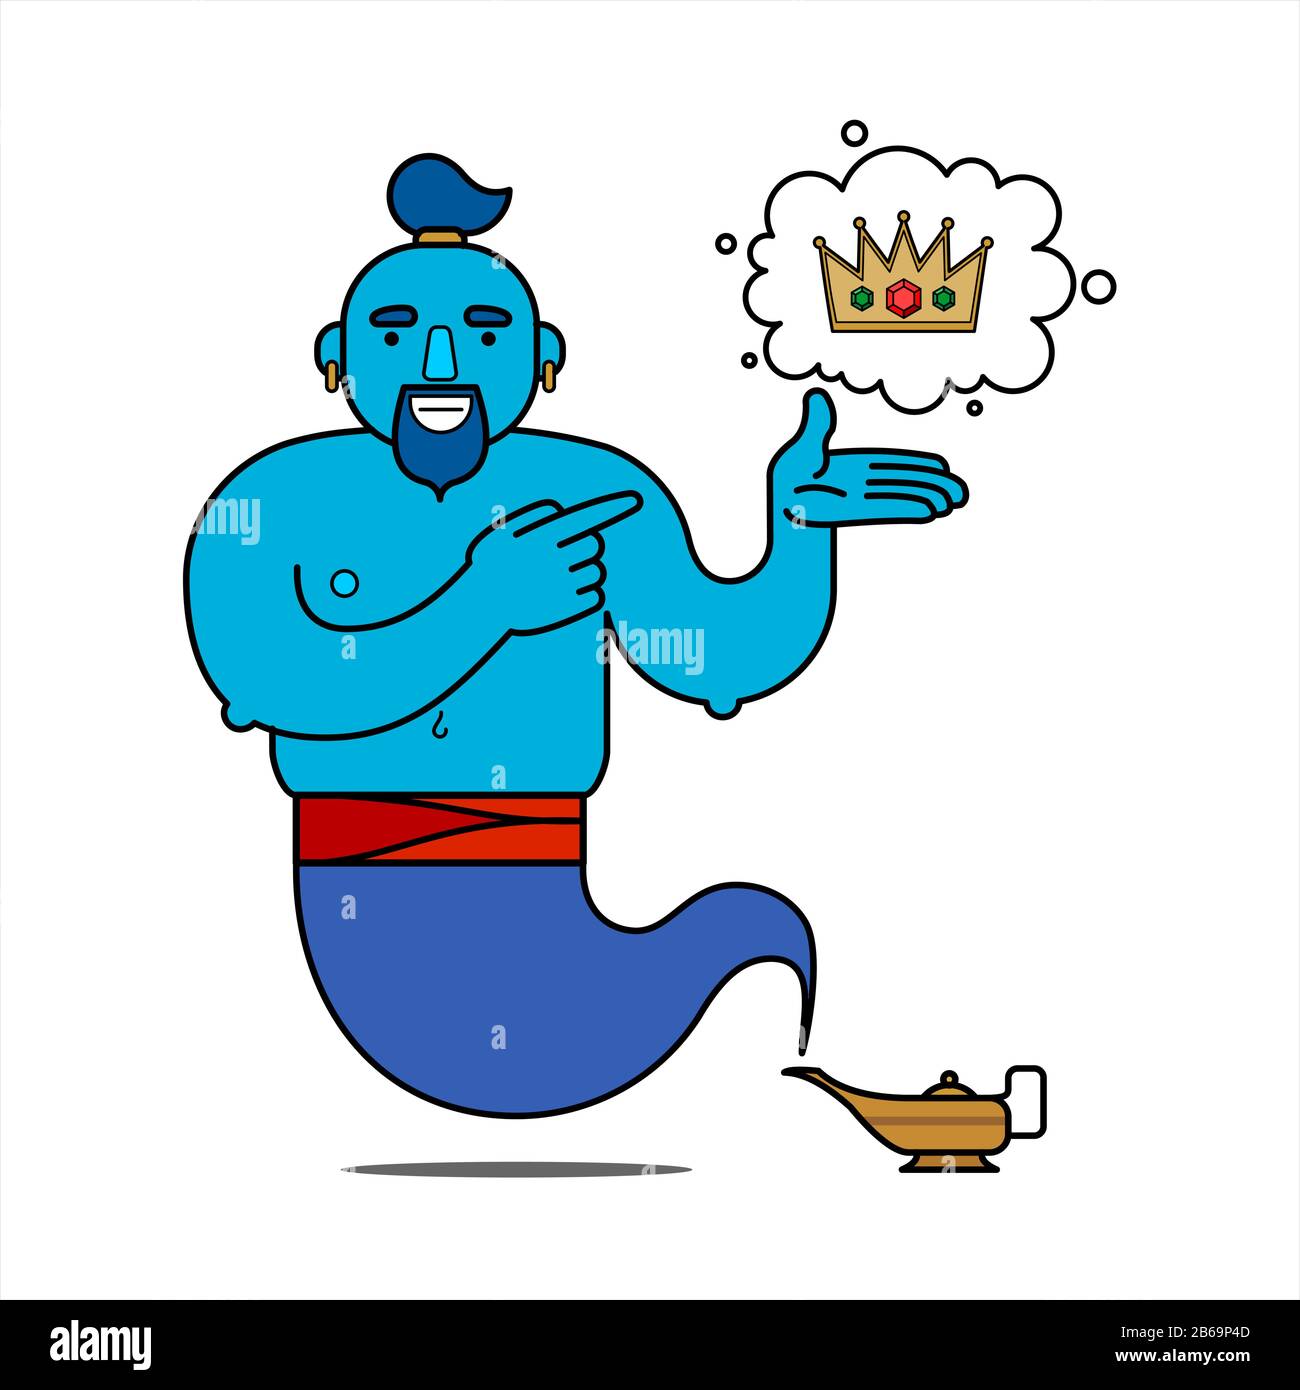 Blue genie from the lamp, cartoon character. The desire to have power. The genie will fulfill any three wishes. The crown is a symbol of power. Illust Stock Vector